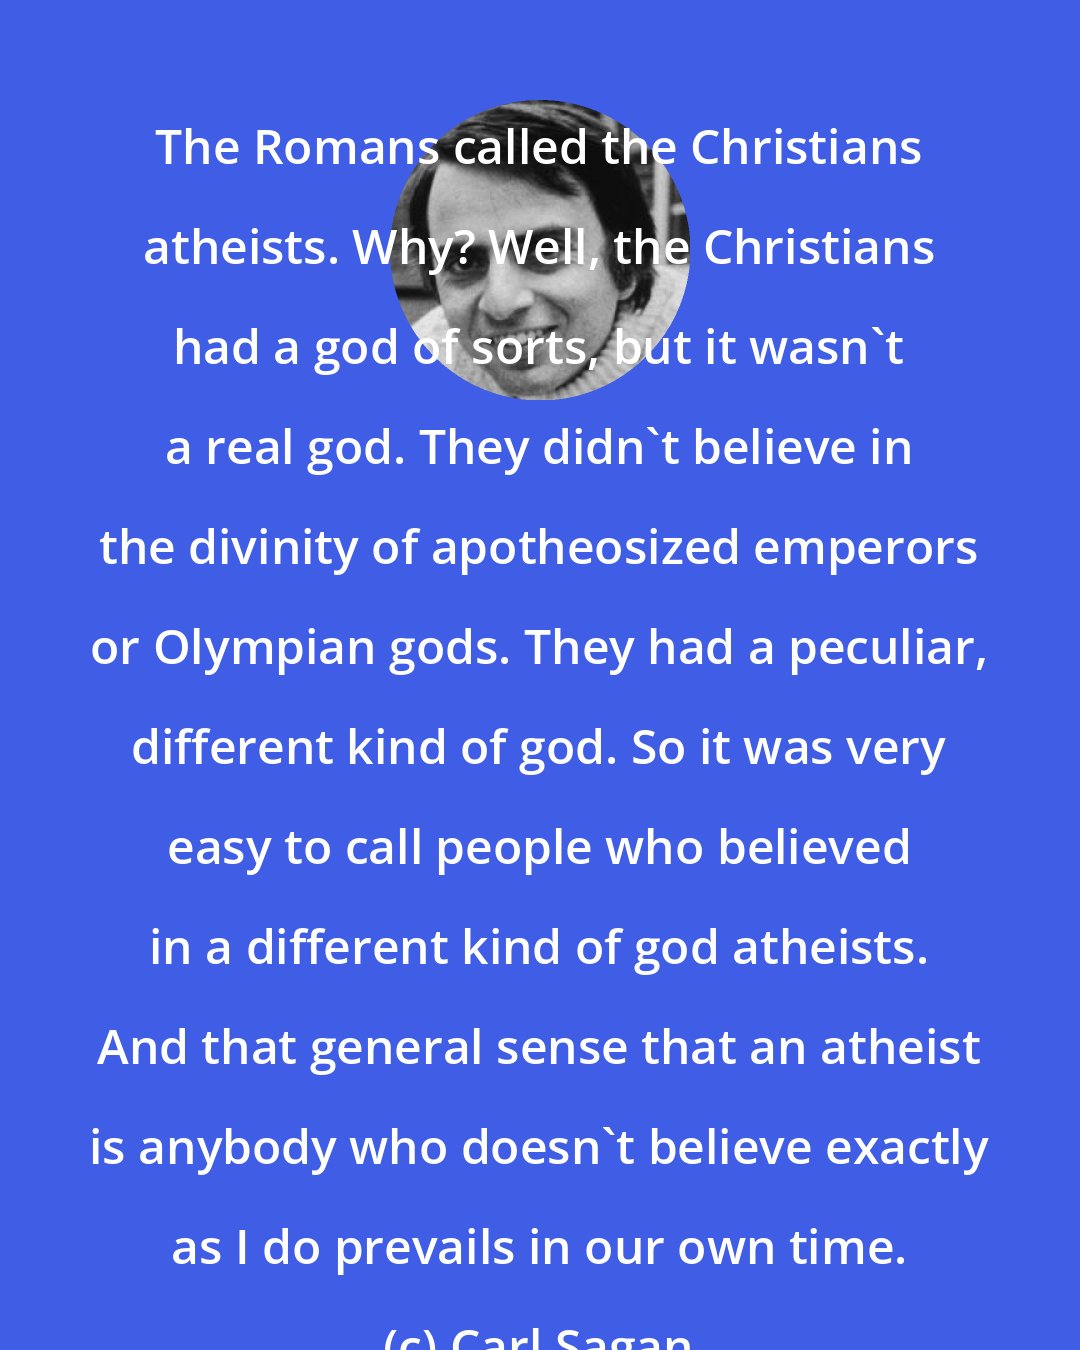 Carl Sagan: The Romans called the Christians atheists. Why? Well, the Christians had a god of sorts, but it wasn't a real god. They didn't believe in the divinity of apotheosized emperors or Olympian gods. They had a peculiar, different kind of god. So it was very easy to call people who believed in a different kind of god atheists. And that general sense that an atheist is anybody who doesn't believe exactly as I do prevails in our own time.